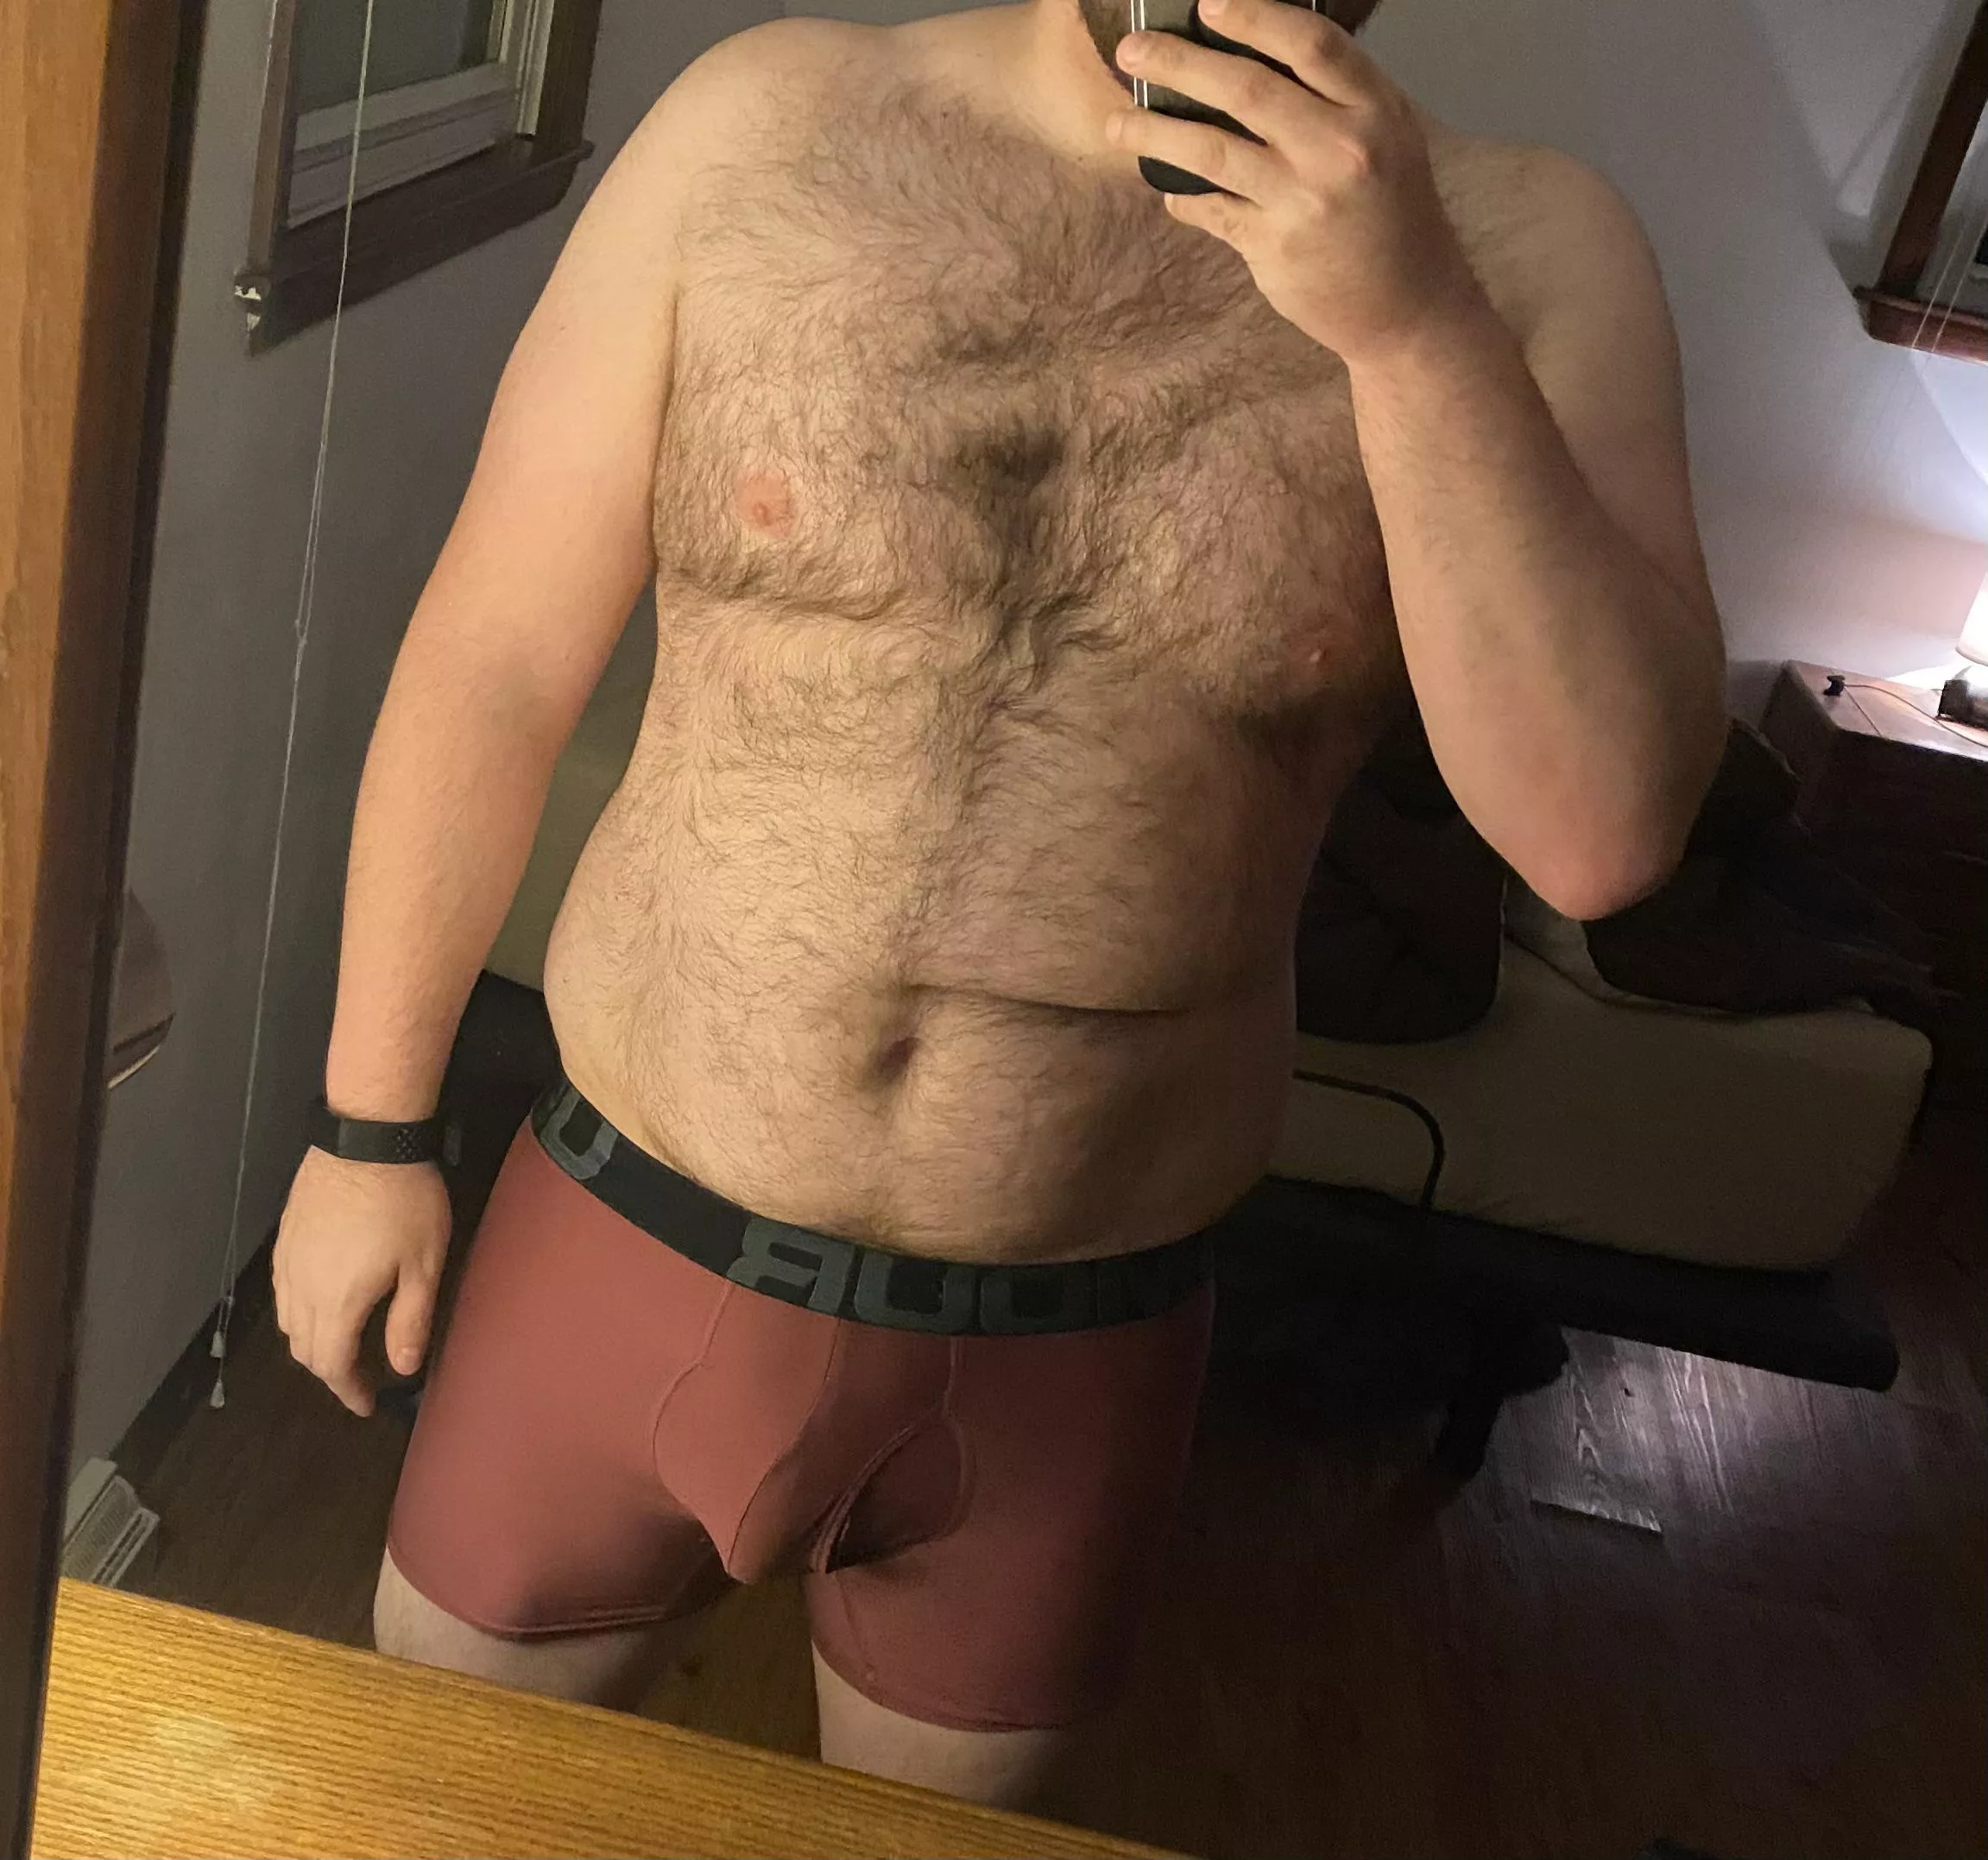 Under Armour Twink Porn - Under armour kinda day nudes in ChubbyDudes | Onlynudes.org